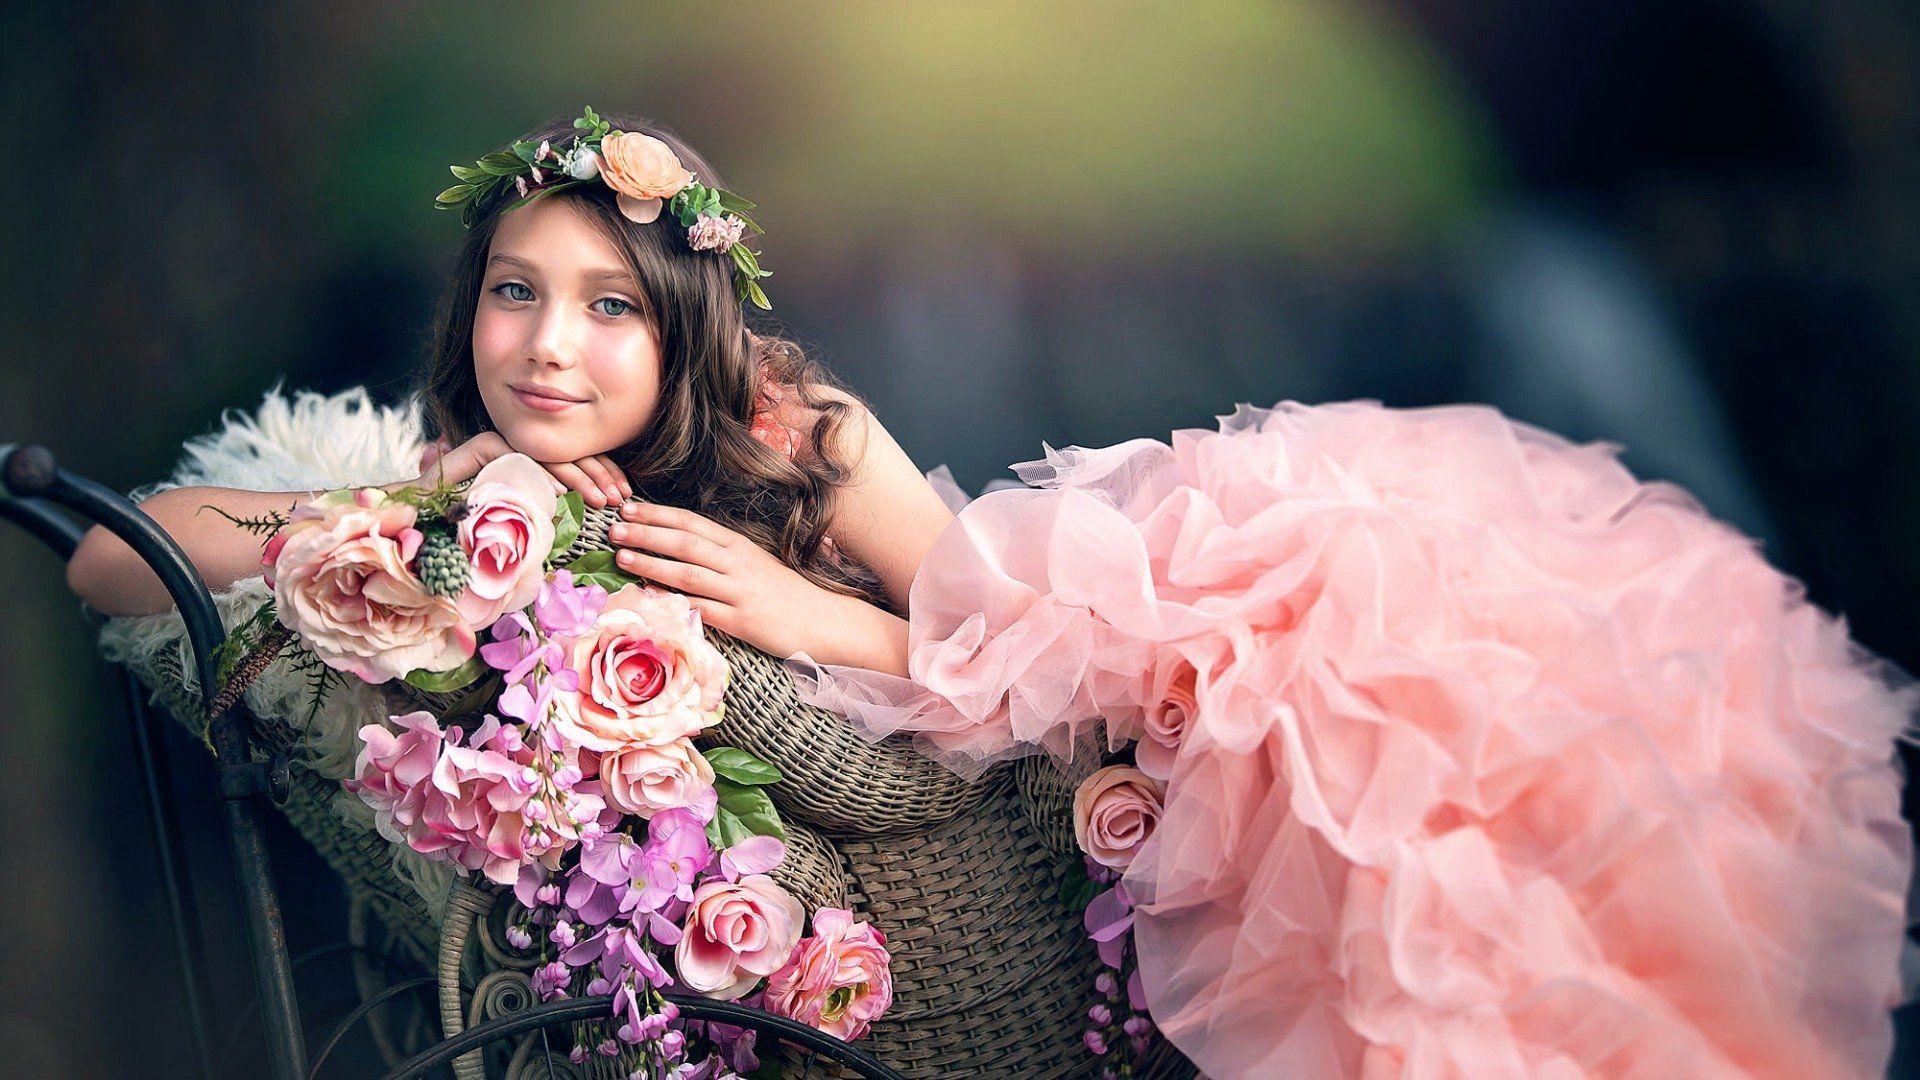 Pretty Girl with Flowers HD Wallpaper